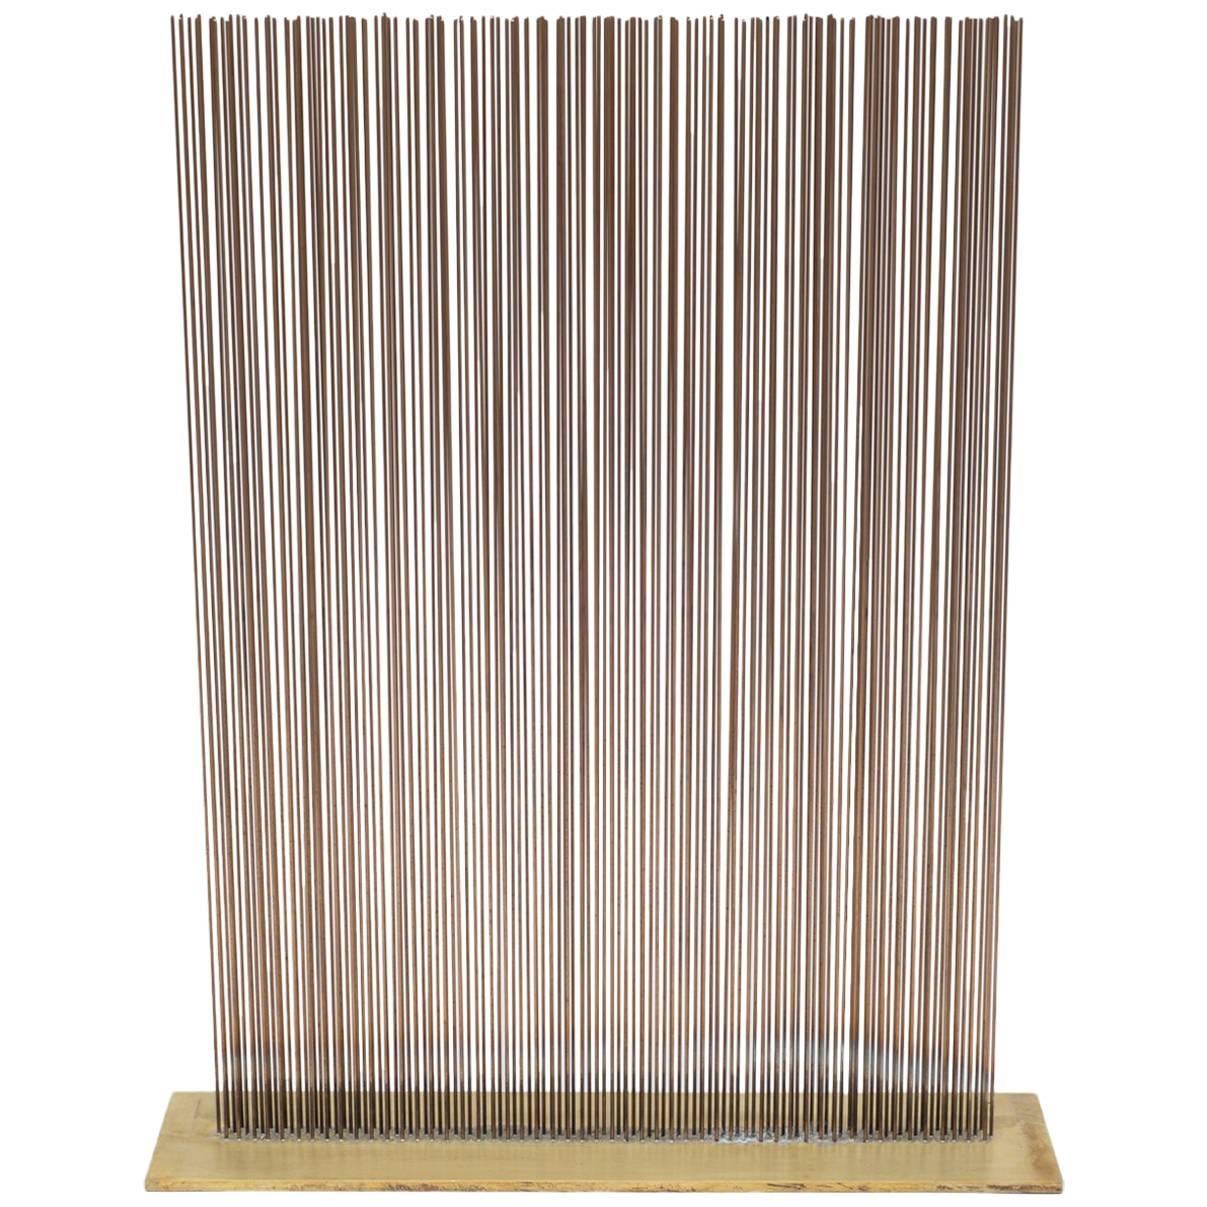 Val Bertoia Linear Three Row Copper and Brass Sonambient Sculpture, USA